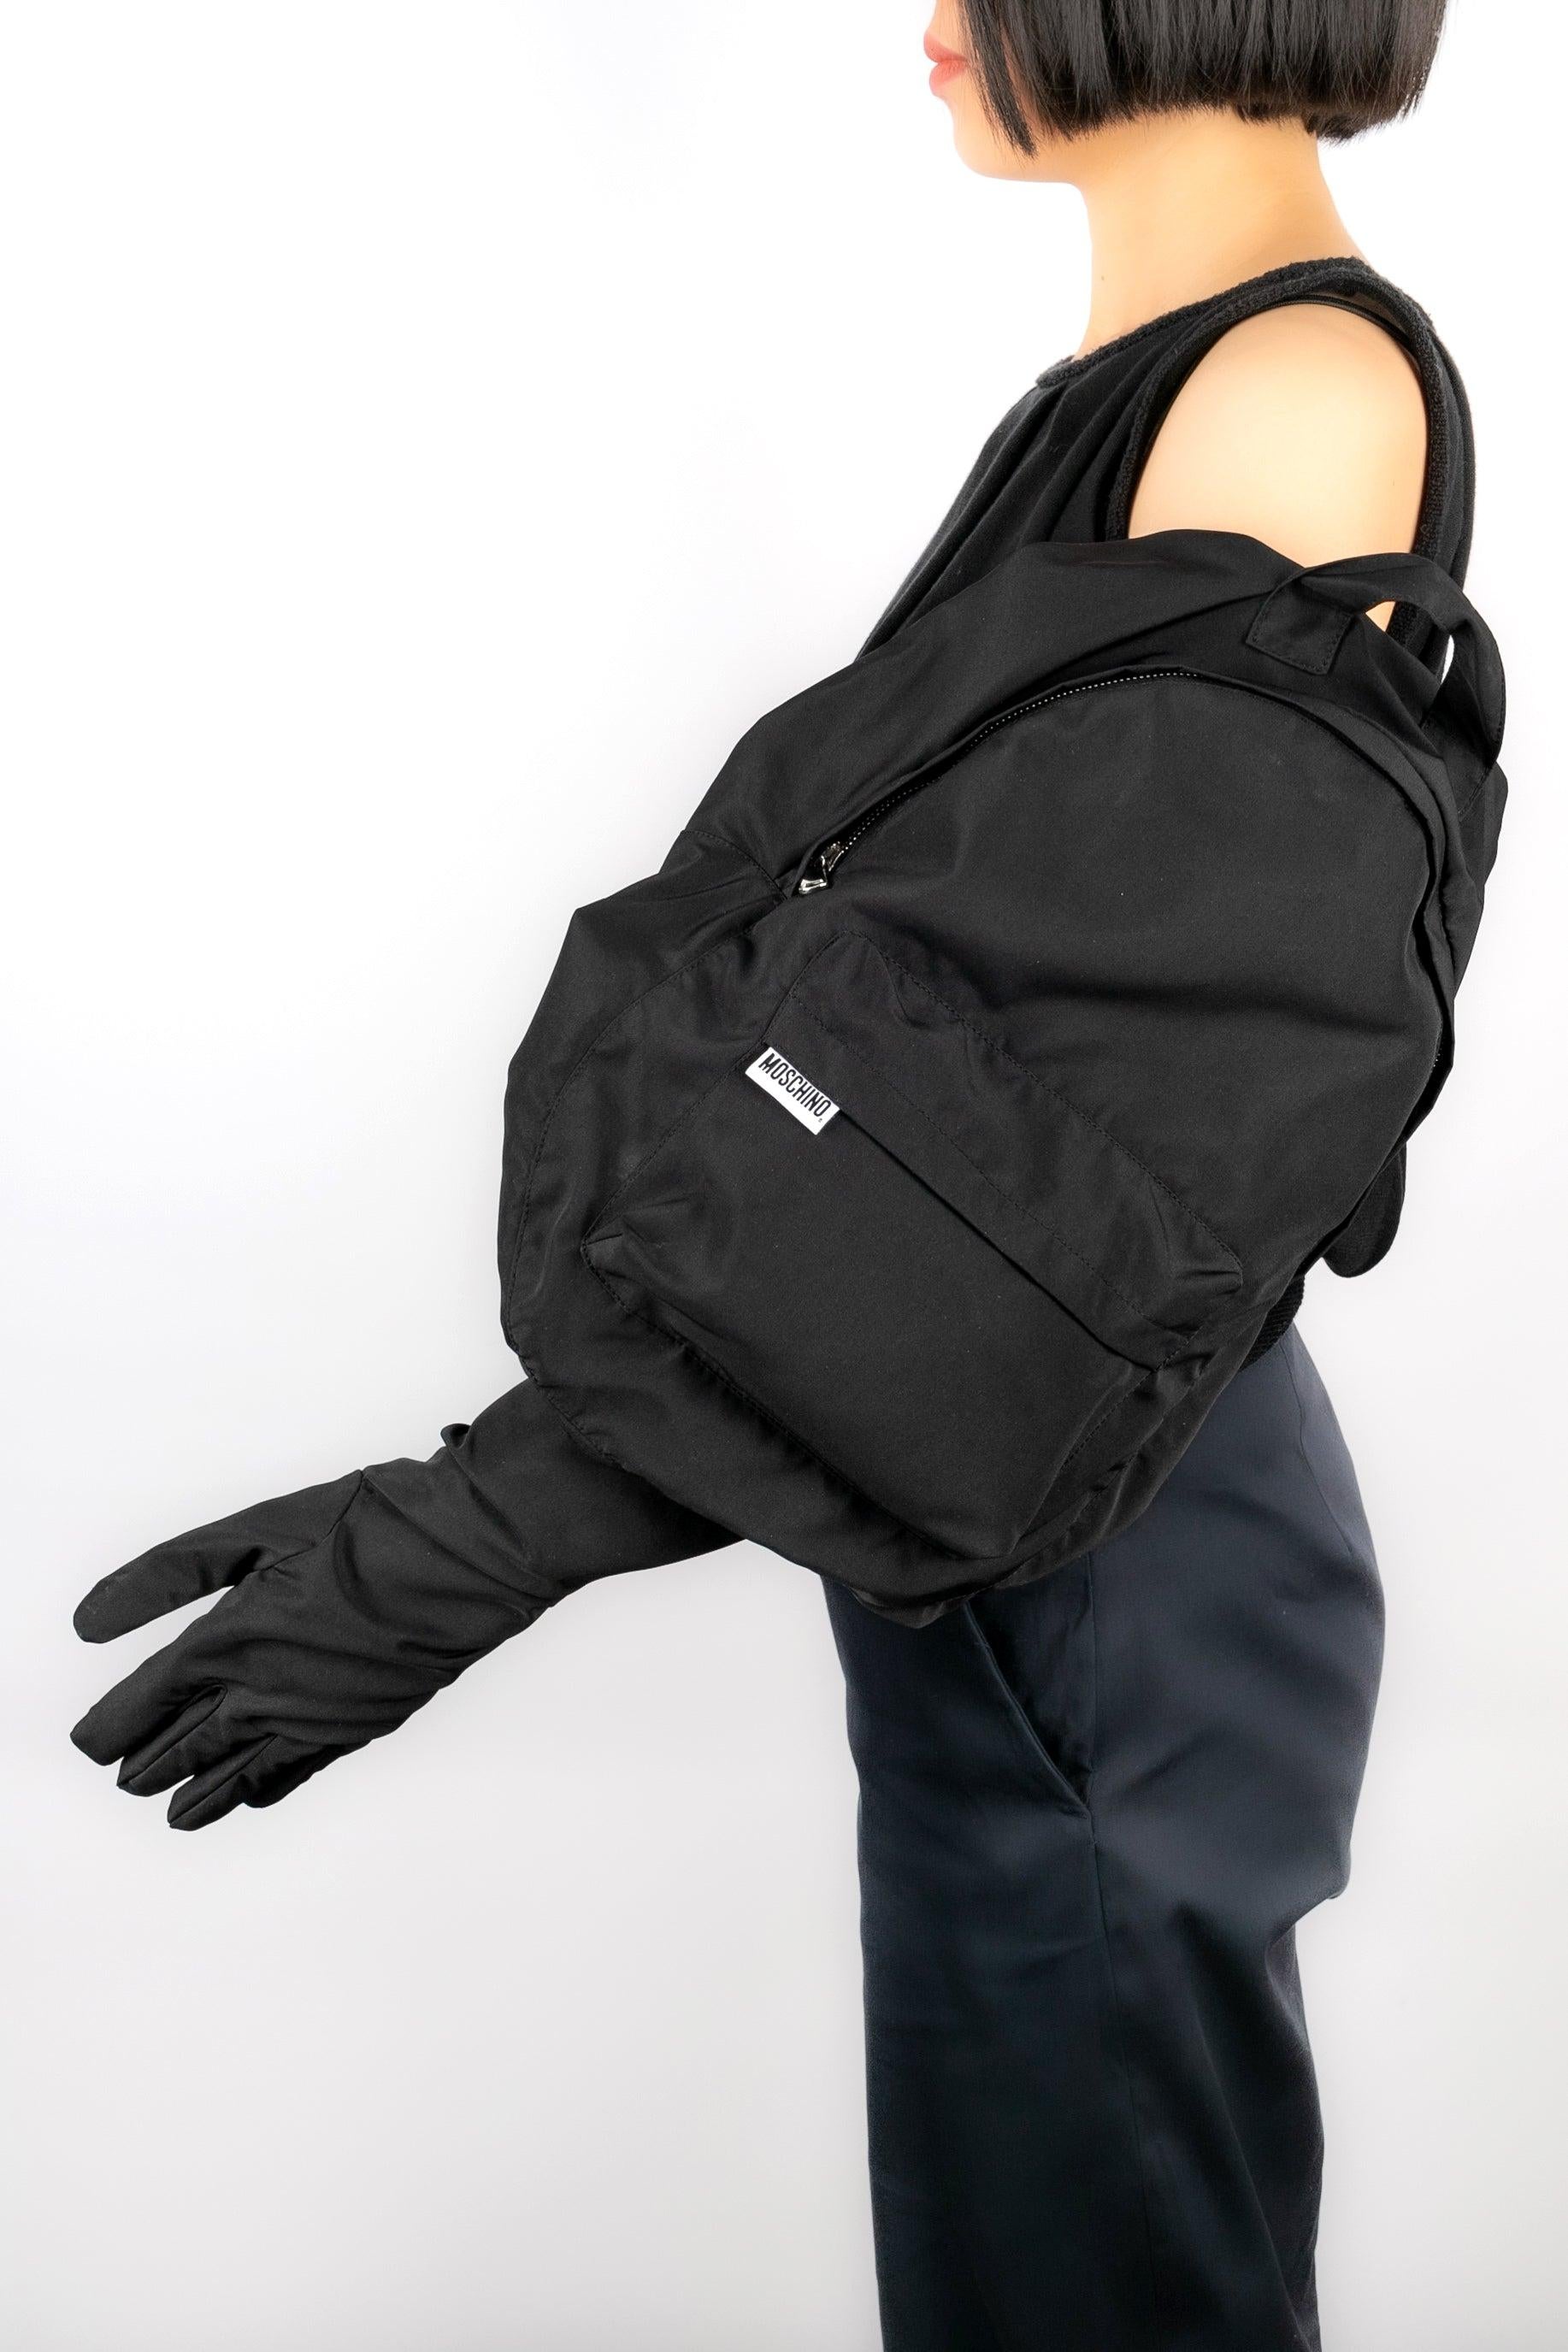 Moschino - (Made in Italy) Uncommon long black canvas gloves which could also be worn as a zipped bag.

Additional information: 
Condition: Very good condition
Dimensions: Height: 72 cm

Seller Reference: ACC27